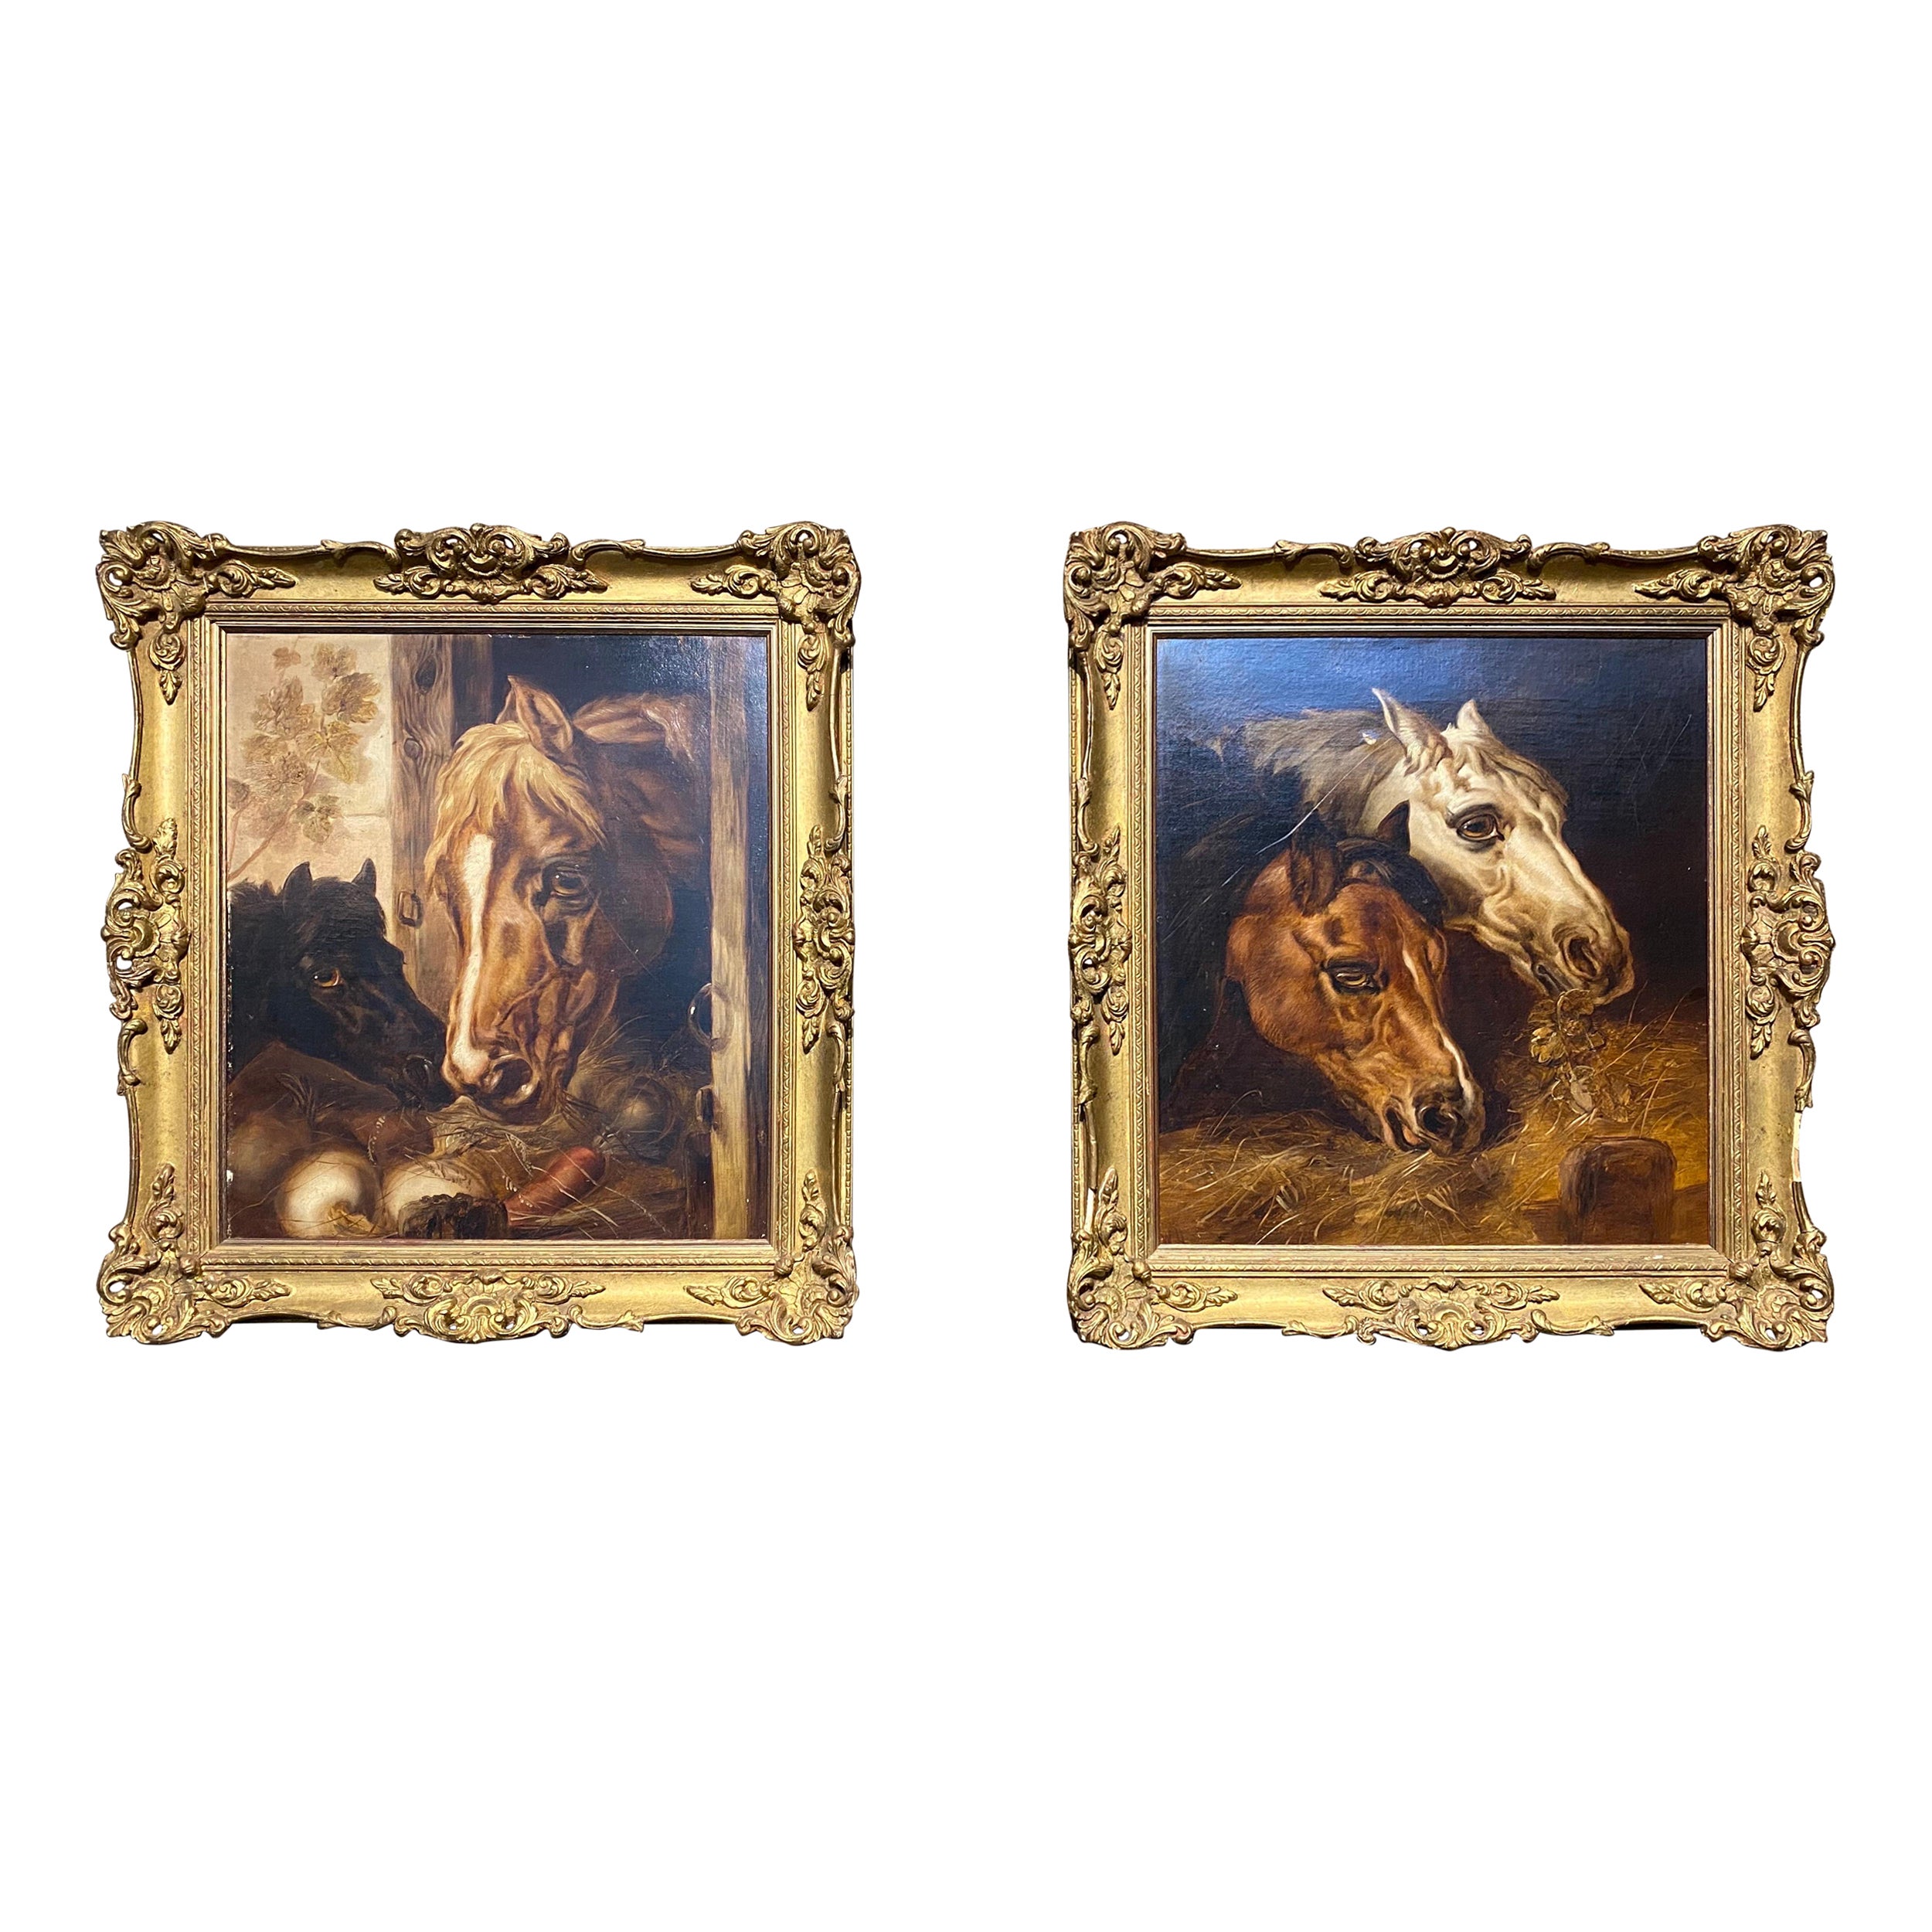 Pair of Antique Oil/Canvas Paintings Depicting Horse and Mare, Signed/Framed 